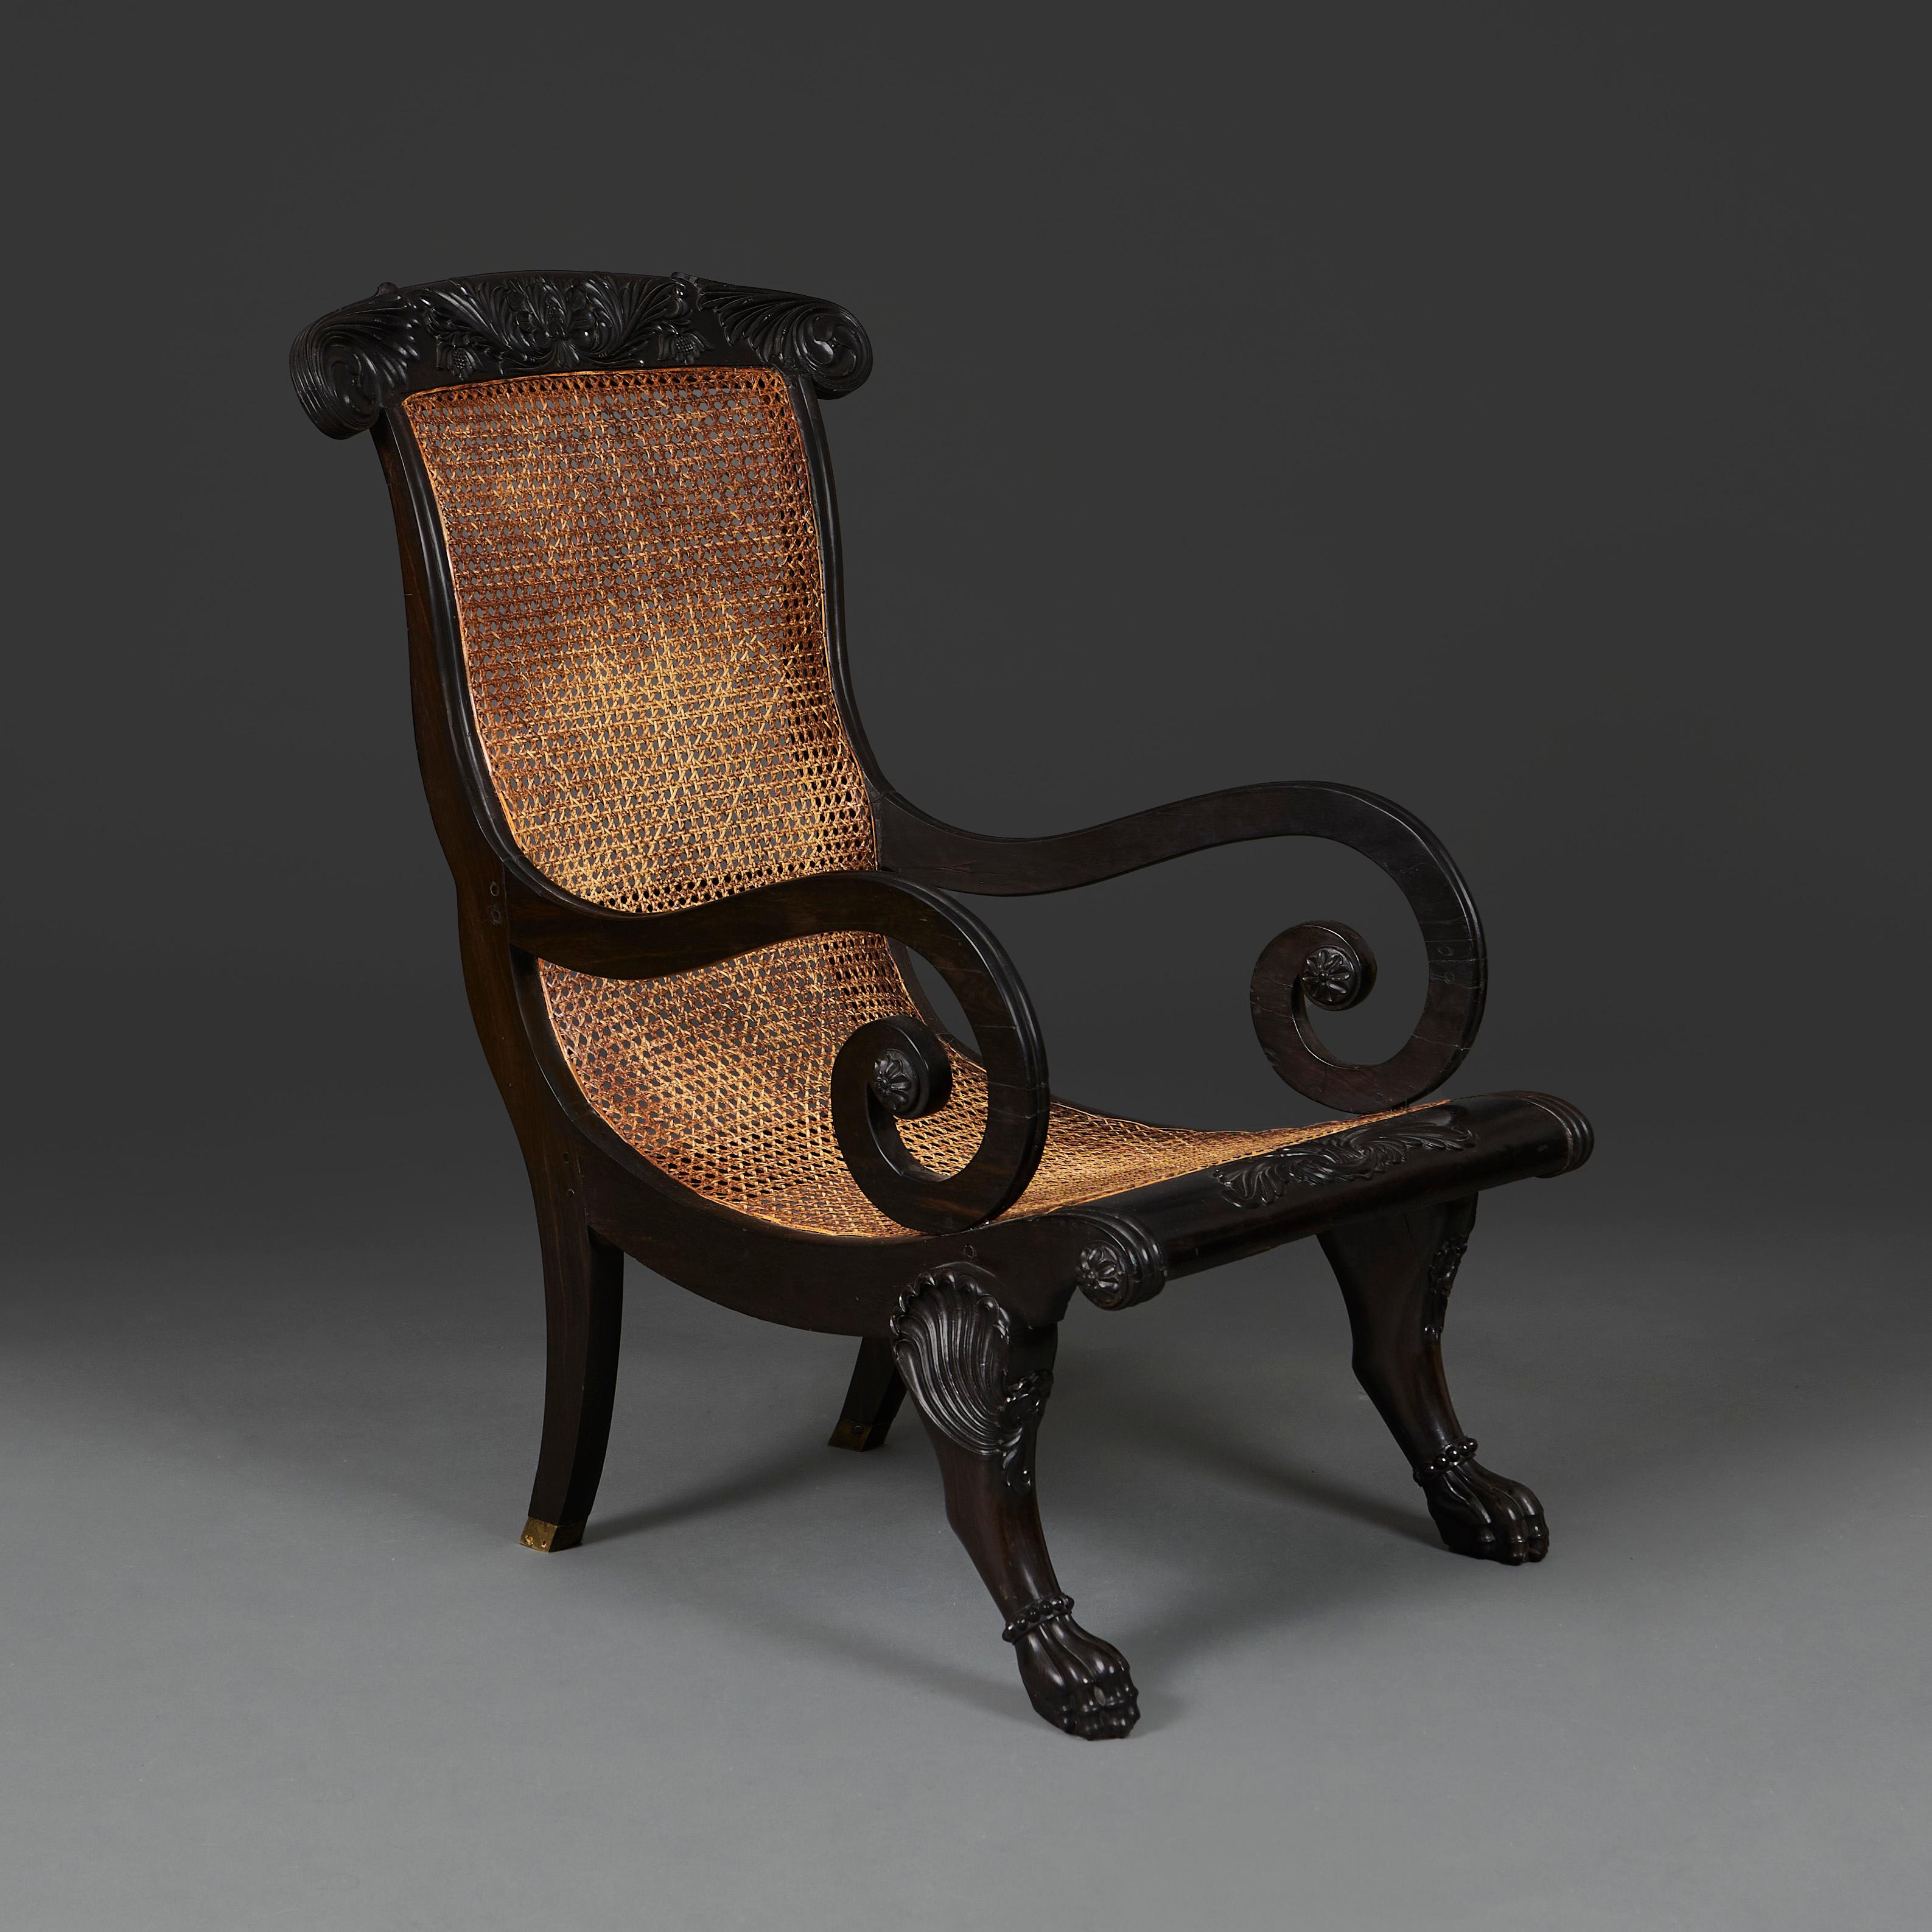 Sri-Lanka, circa 1820

An exceptional mid nineteenth century Anglo Sinhalese planters chair, of solid ebony construction, with scoop caned seat and scrolling arms, the seat rail and top of the back carved with foliate designs, the front two legs